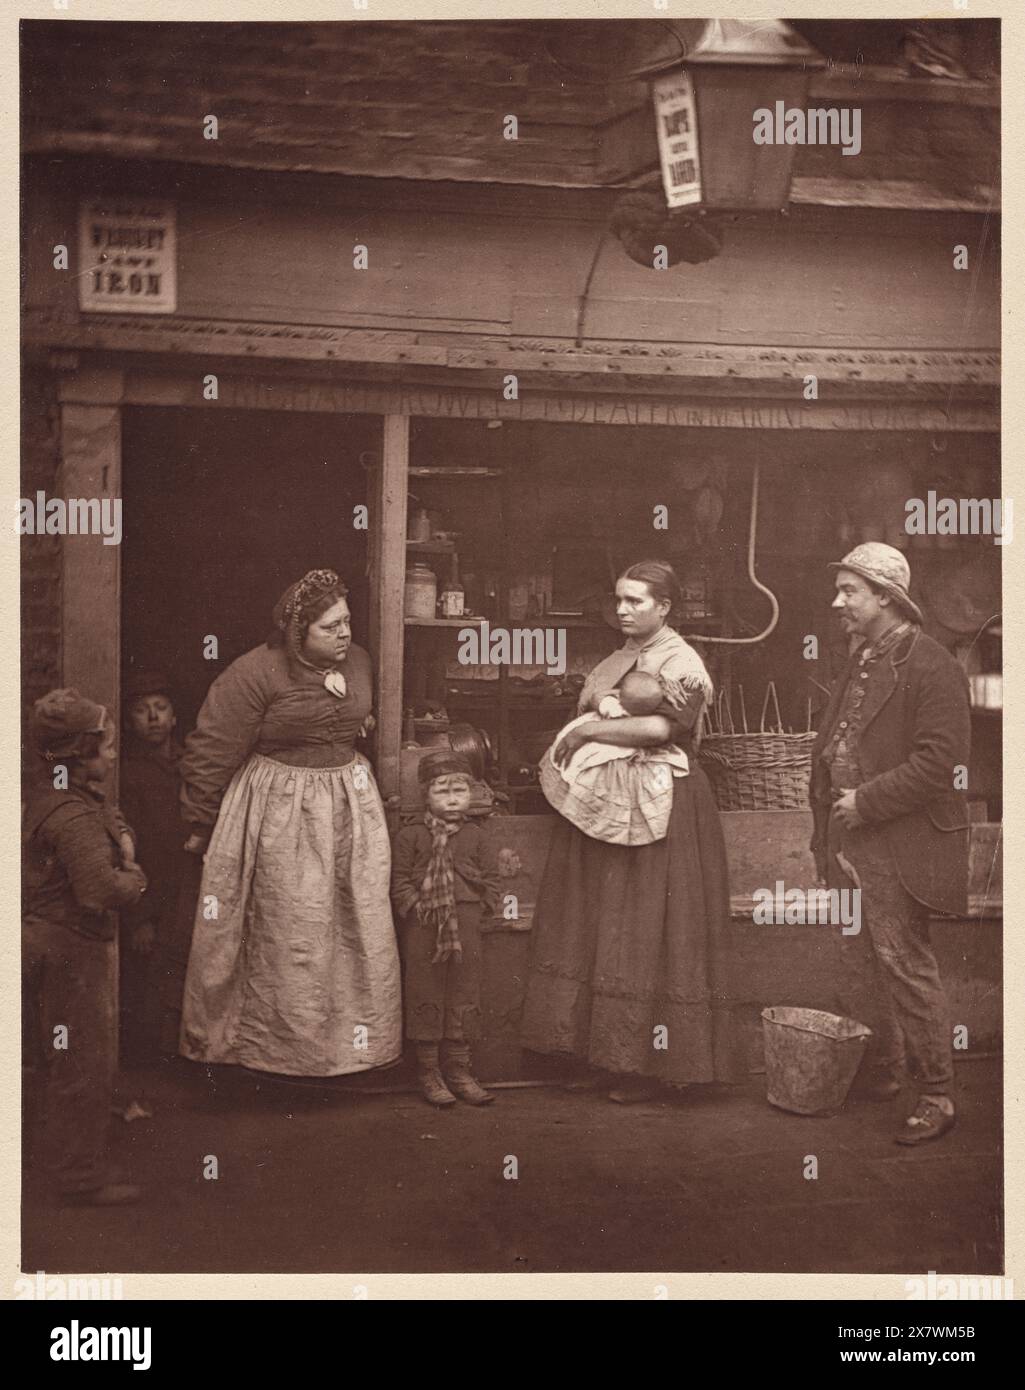 Sufferers from the Floods.  Vintage London Street Photography, late 19th century, by John Thomson, 1877 Stock Photo